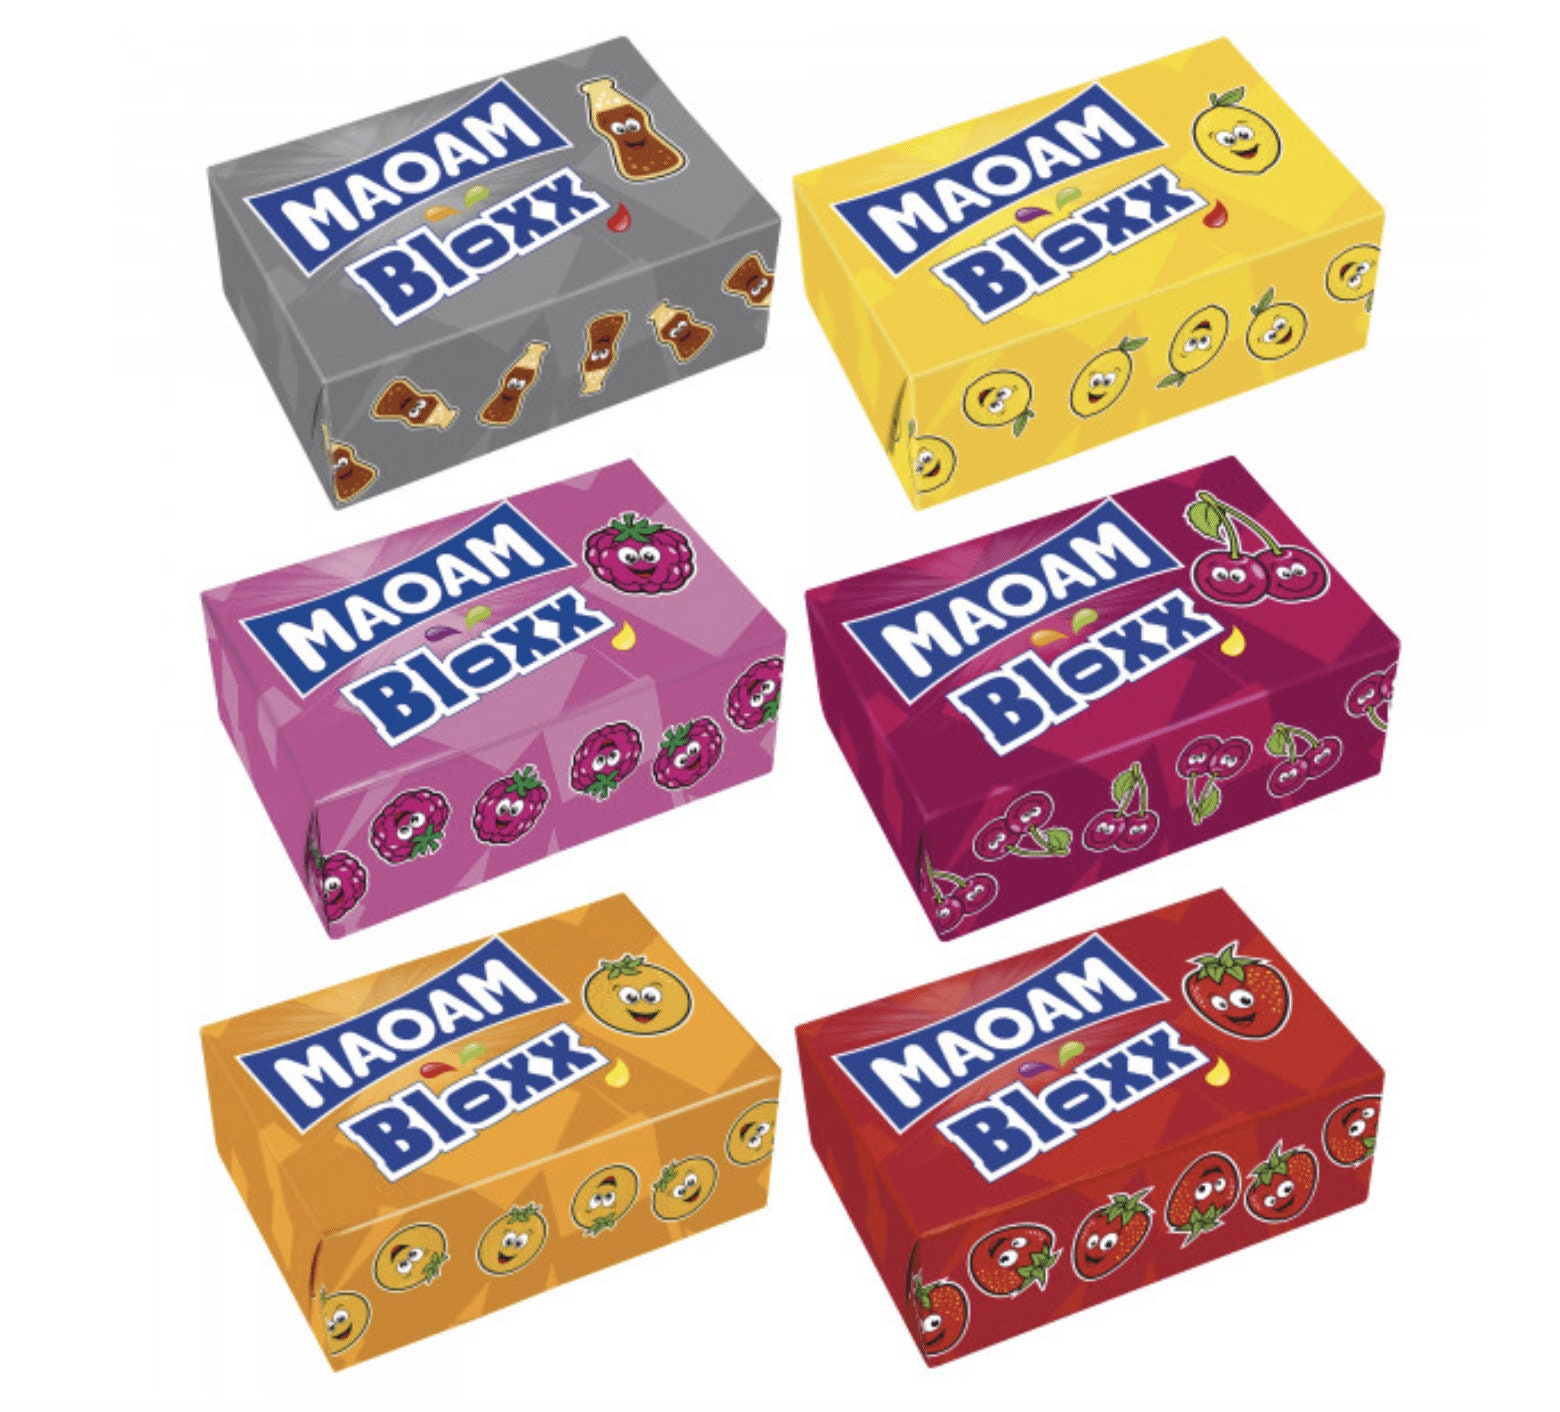  Maoam Bloxx, Maoam Sweets, 8 Pieces of Unique Maoam Bloxx  Flavors, Maoam Candy